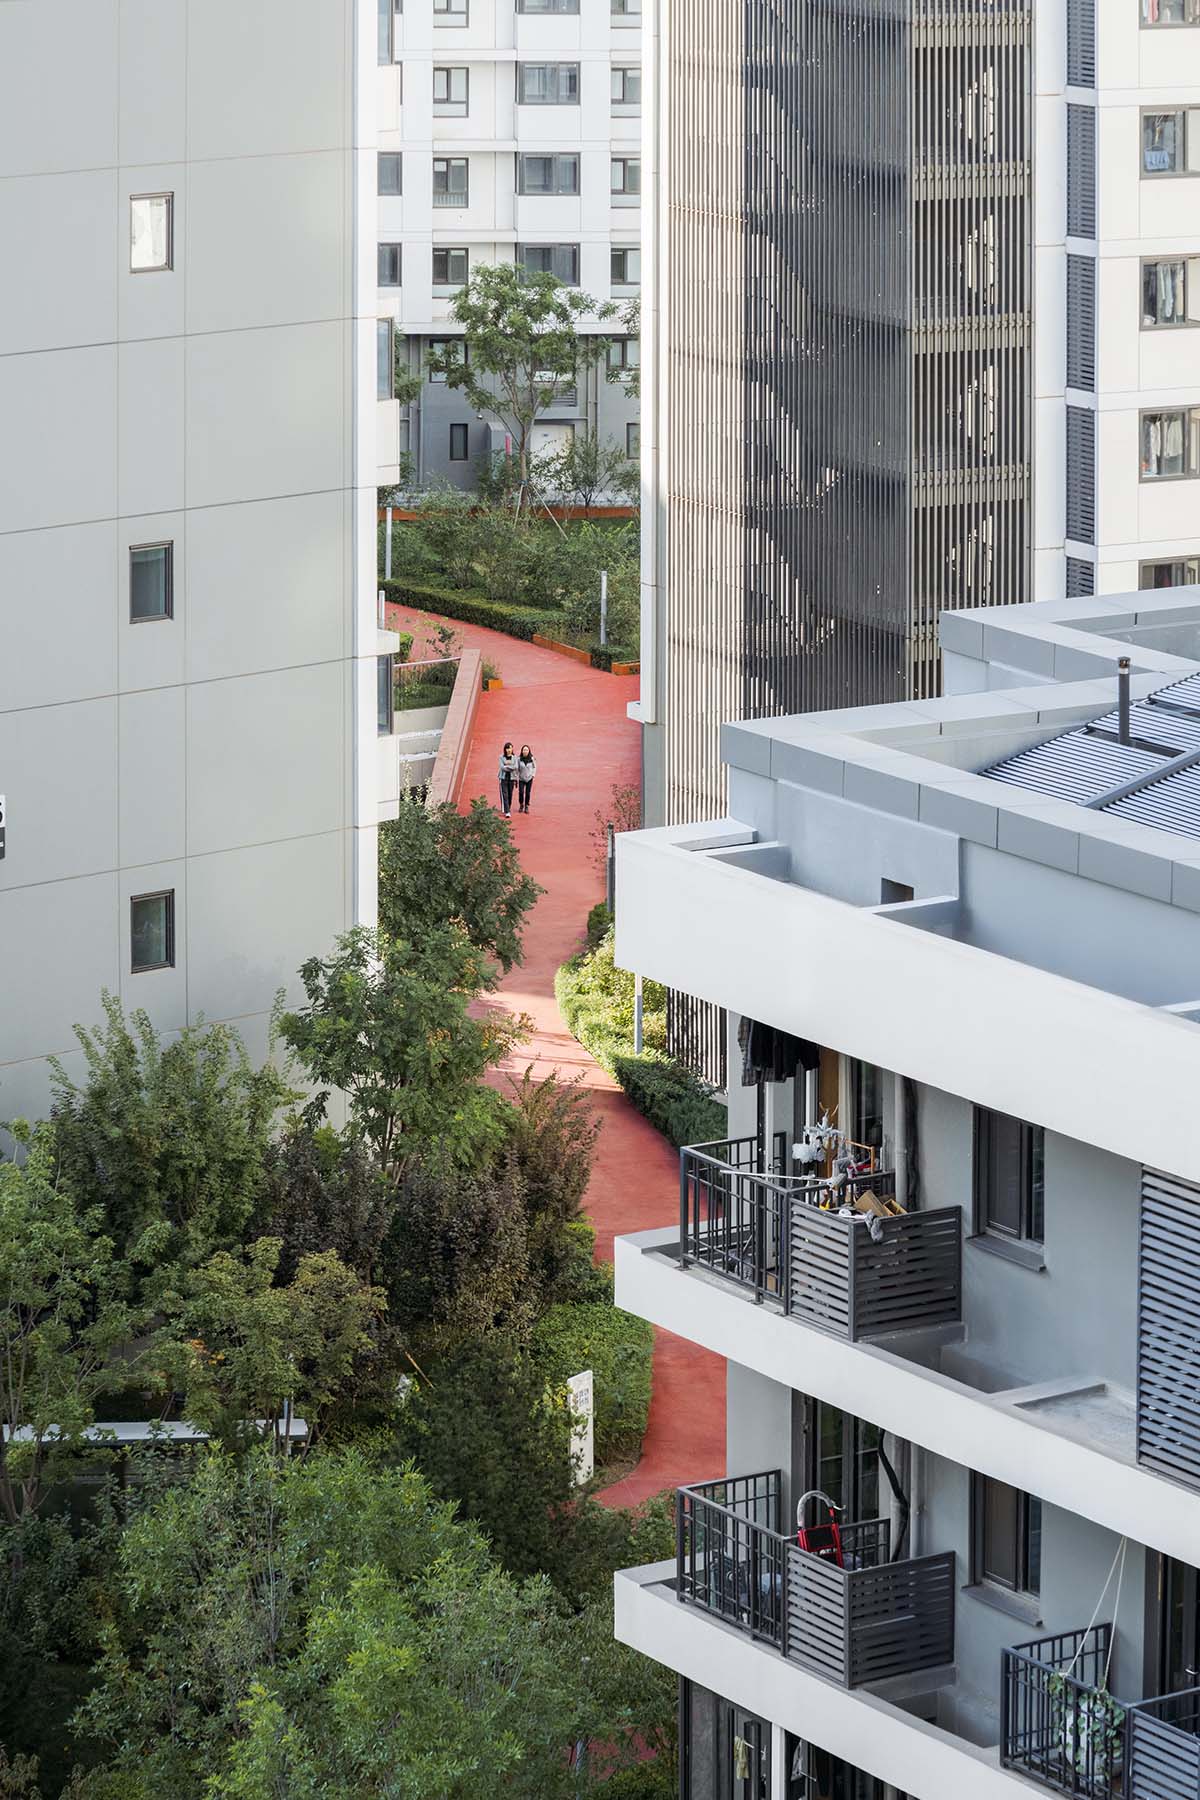 MAD built its first social housing project in Beijing 